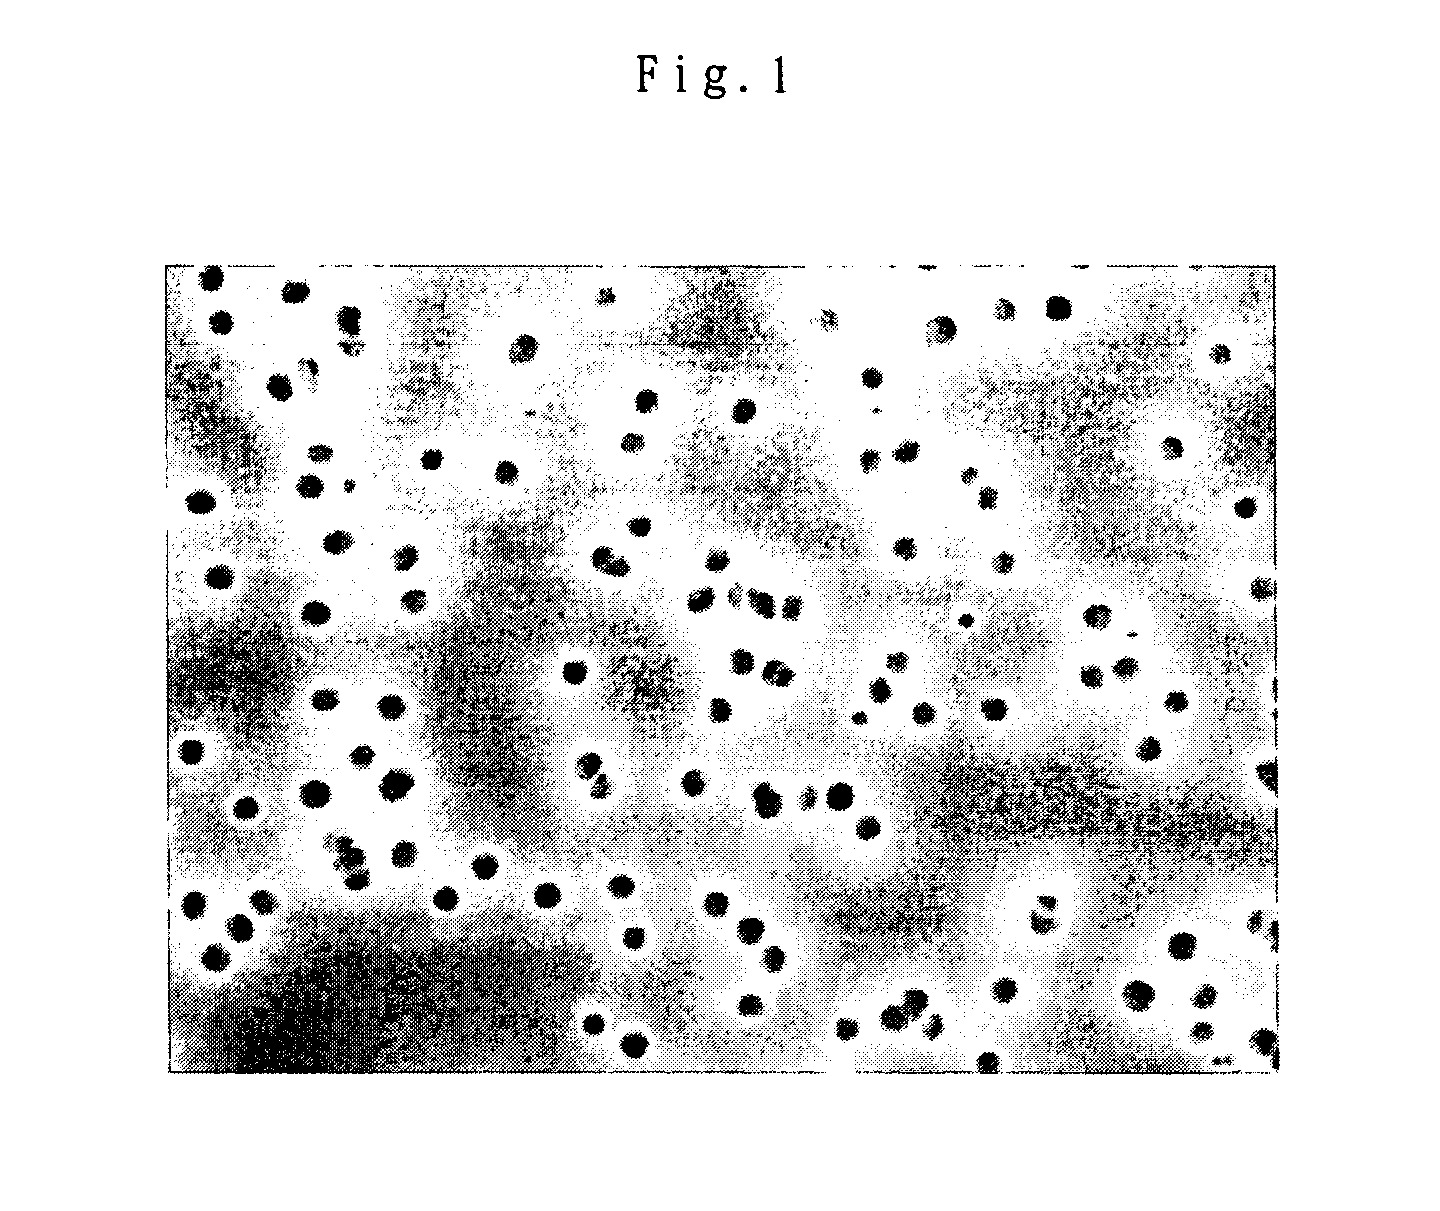 Abrasive compounds for semiconductor planarization